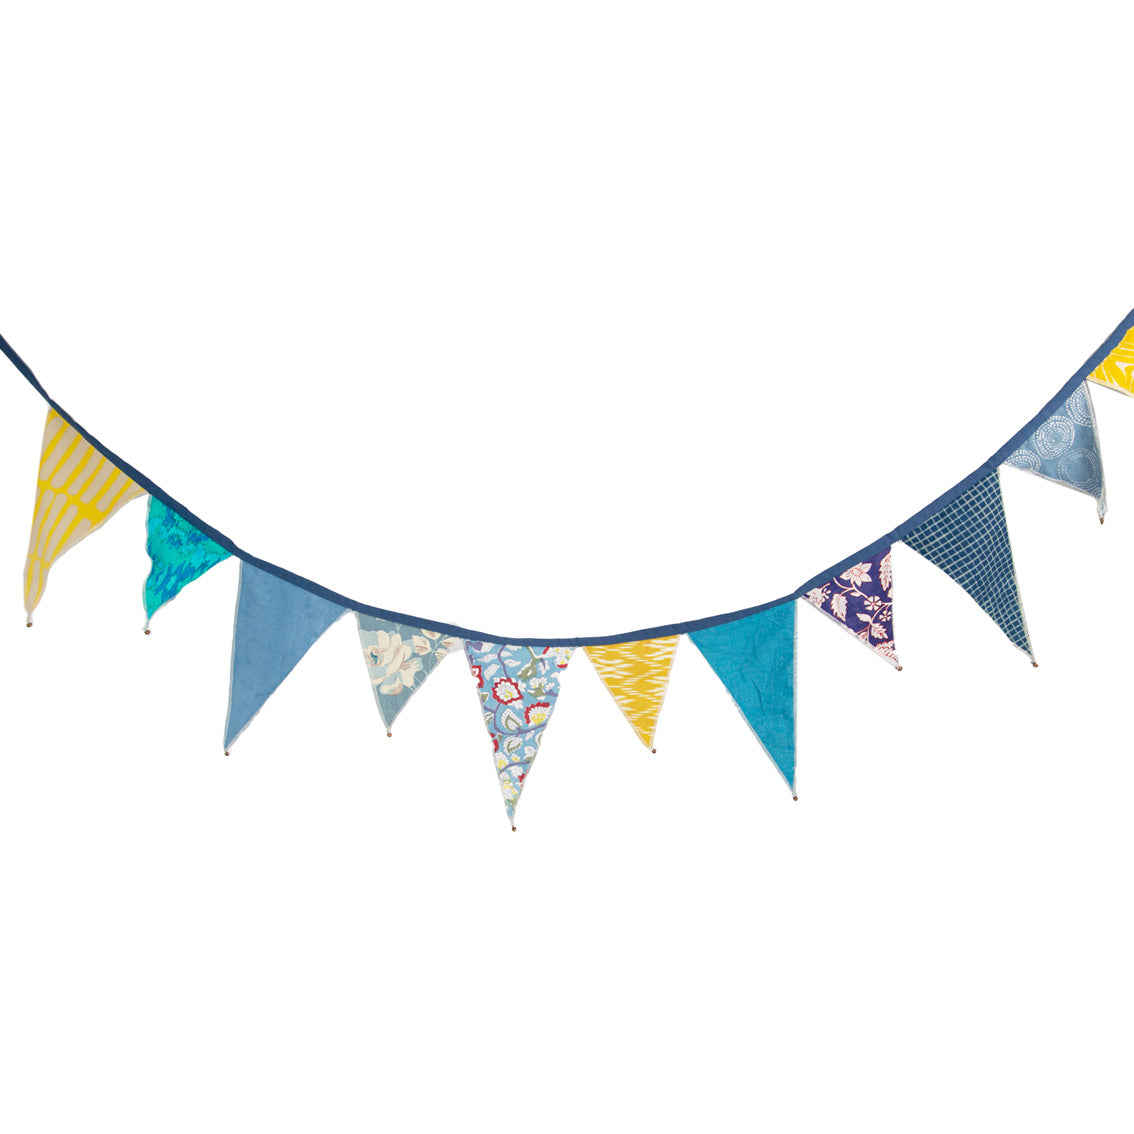 Souk Blue and Yellow Upcycled Cotton Bunting - 3m